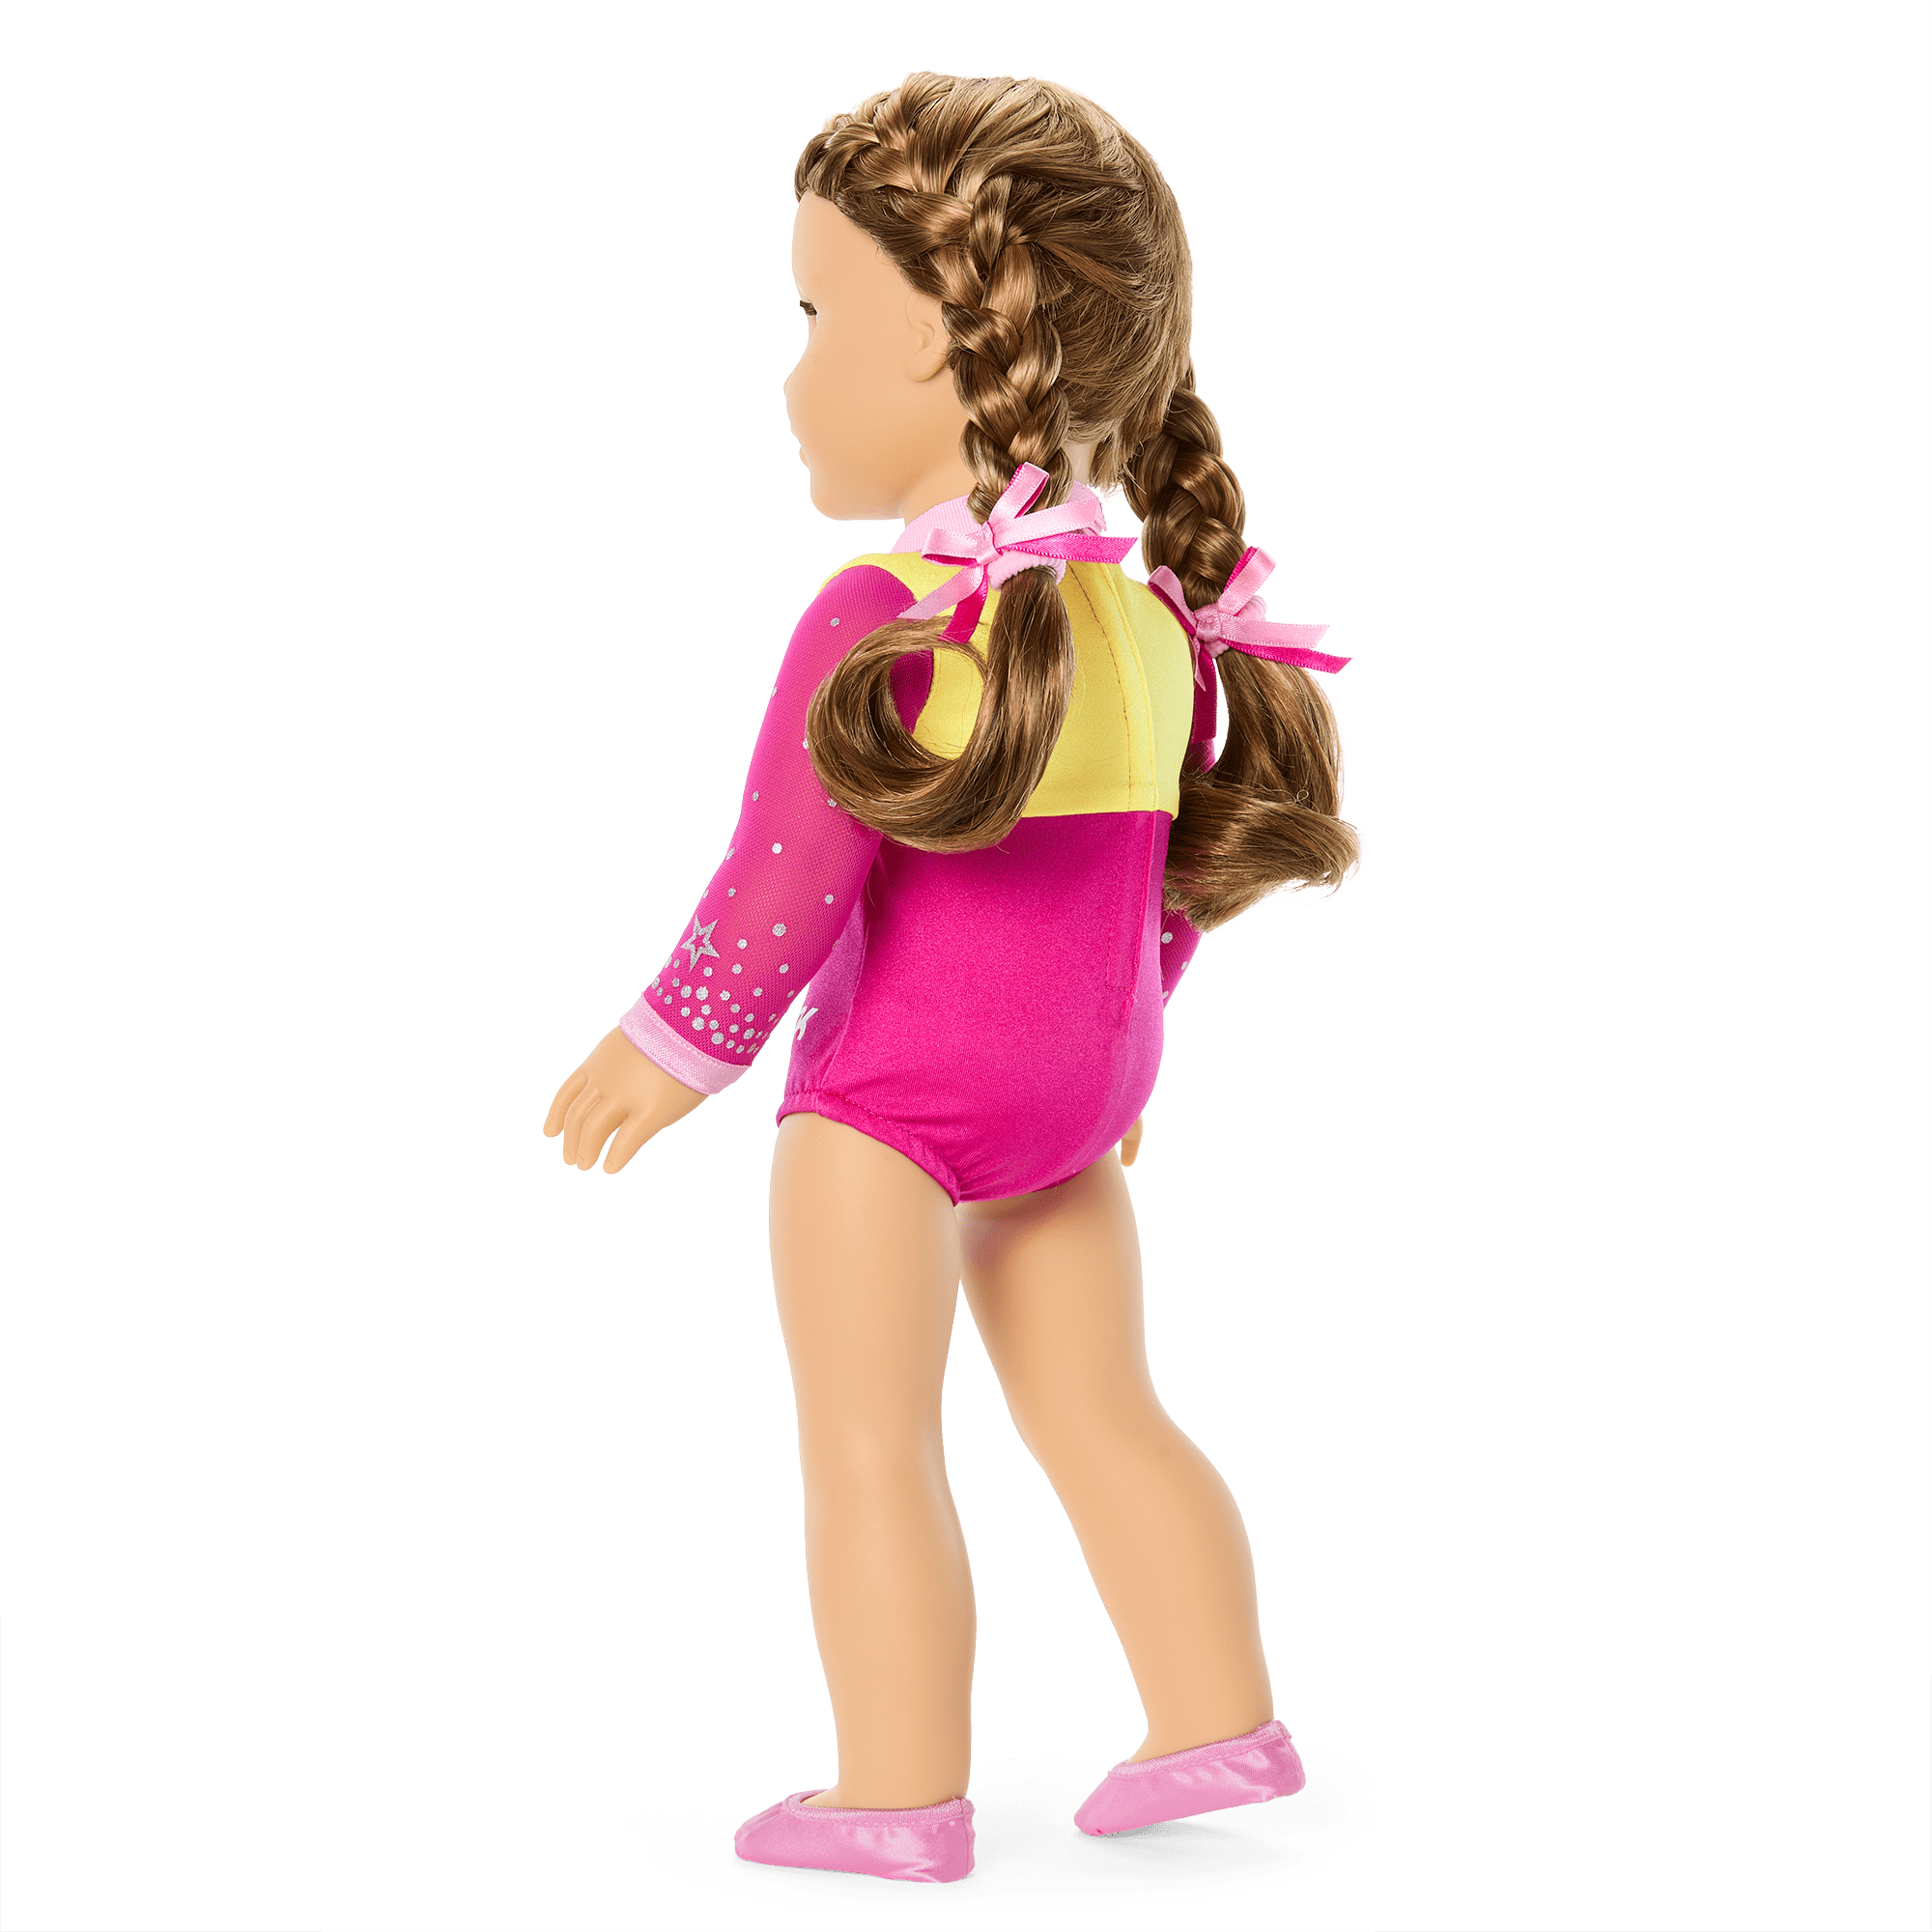 American Girl GYMNASTICS OUTFIT for DOLLS + CHARM - DOLL NOT